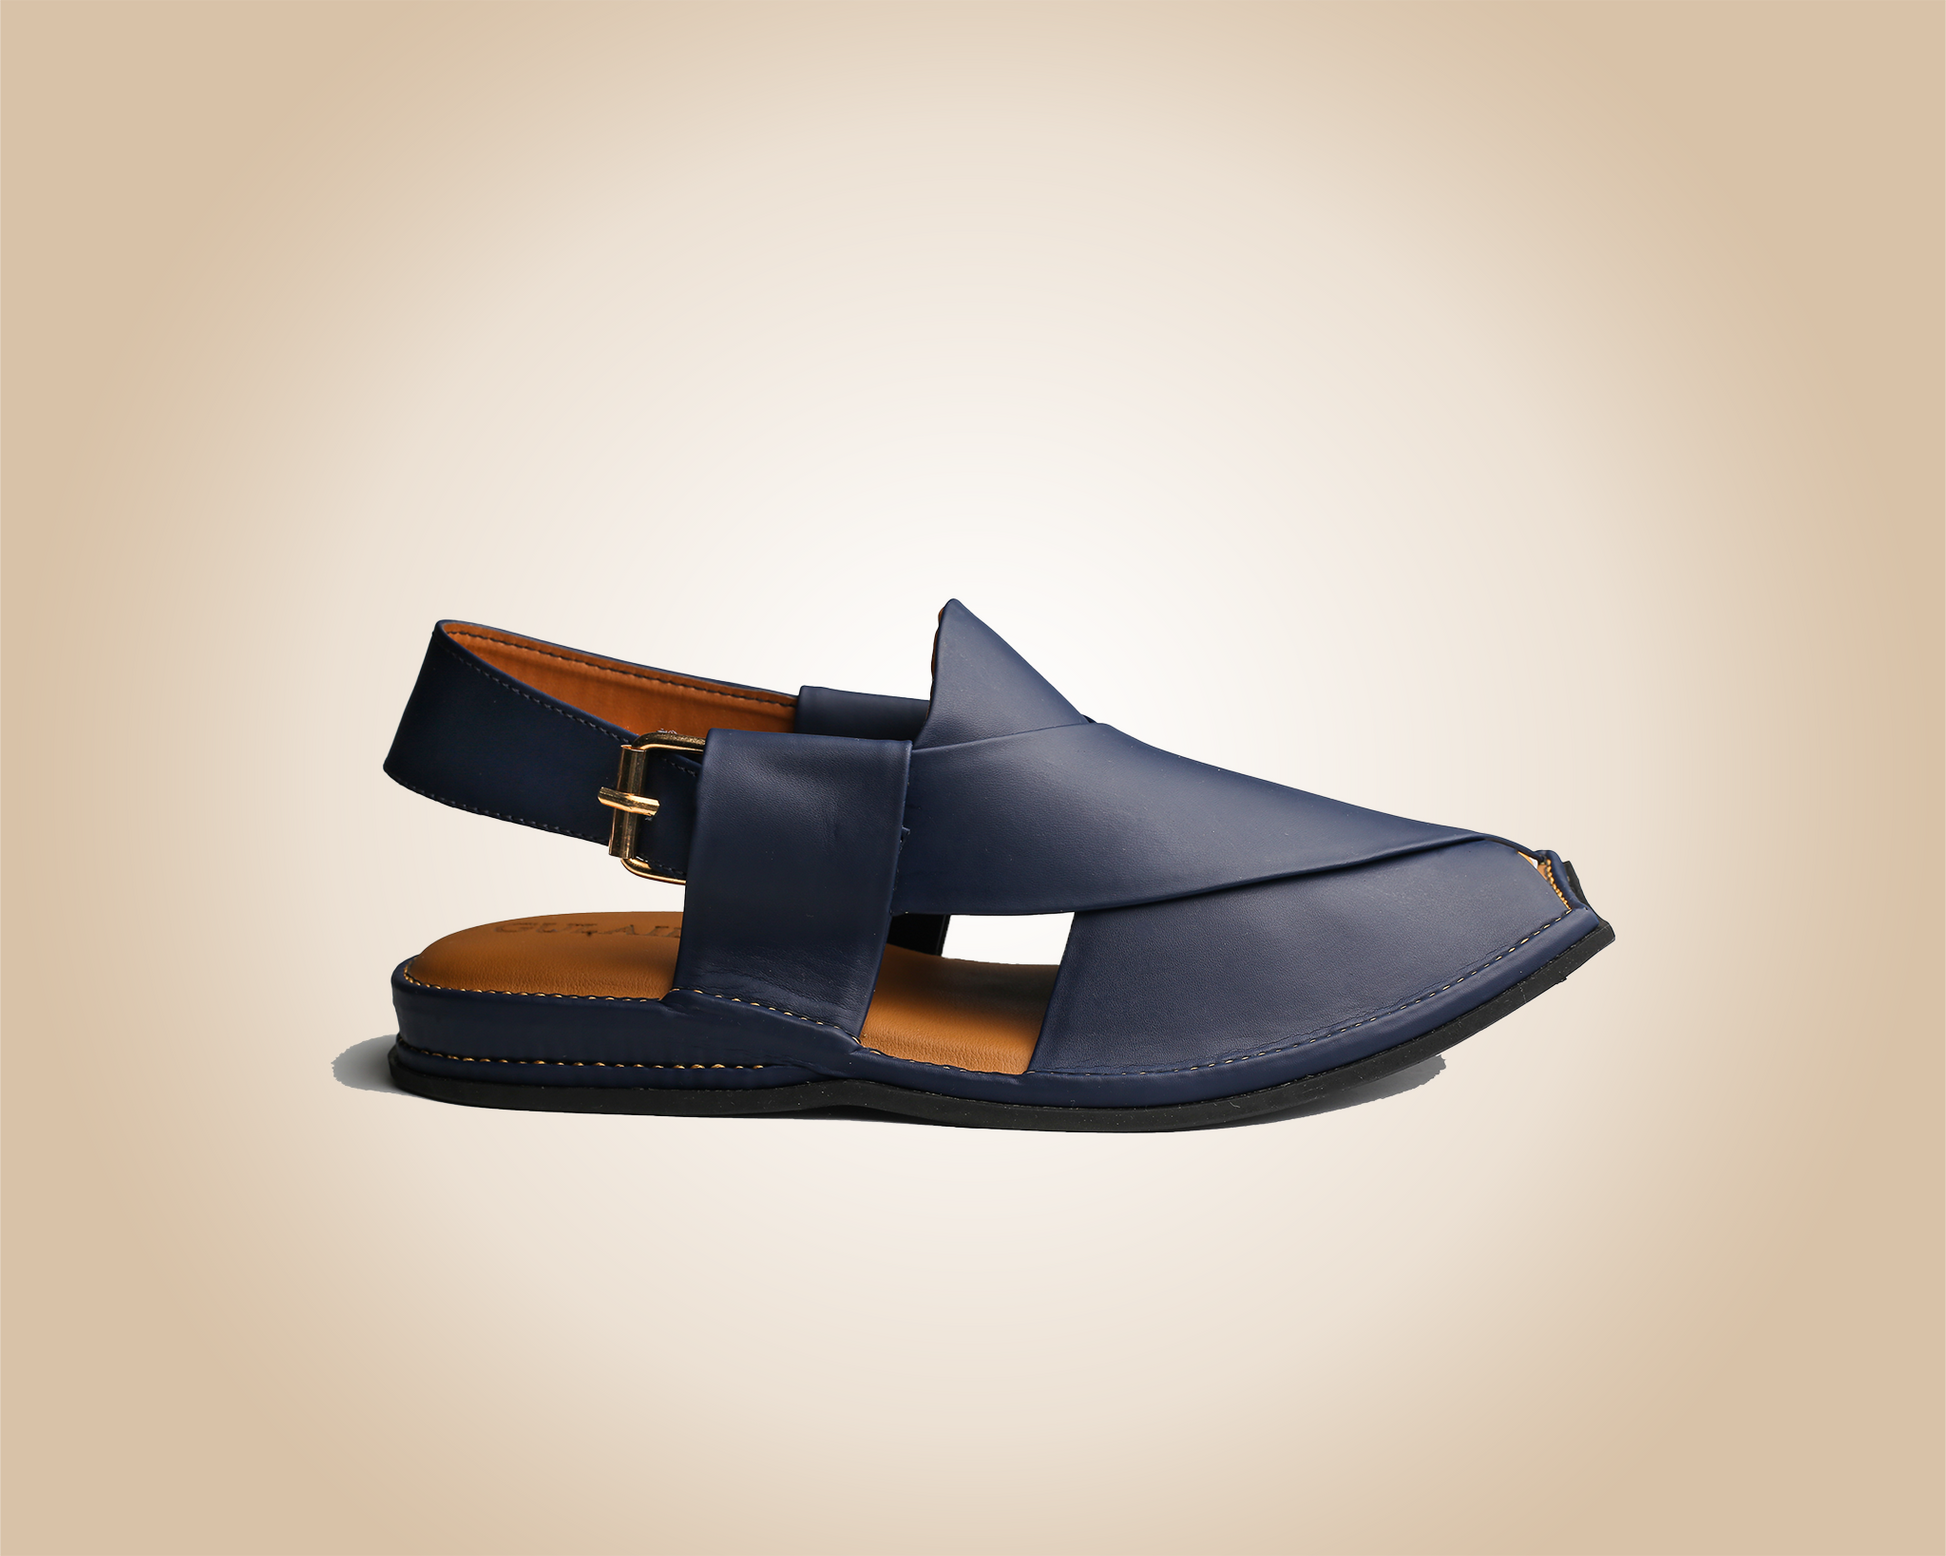 "Cut Prussian Blue Saply sandals, known as Peshawari Chappal, featuring traditional leather craftsmanship."